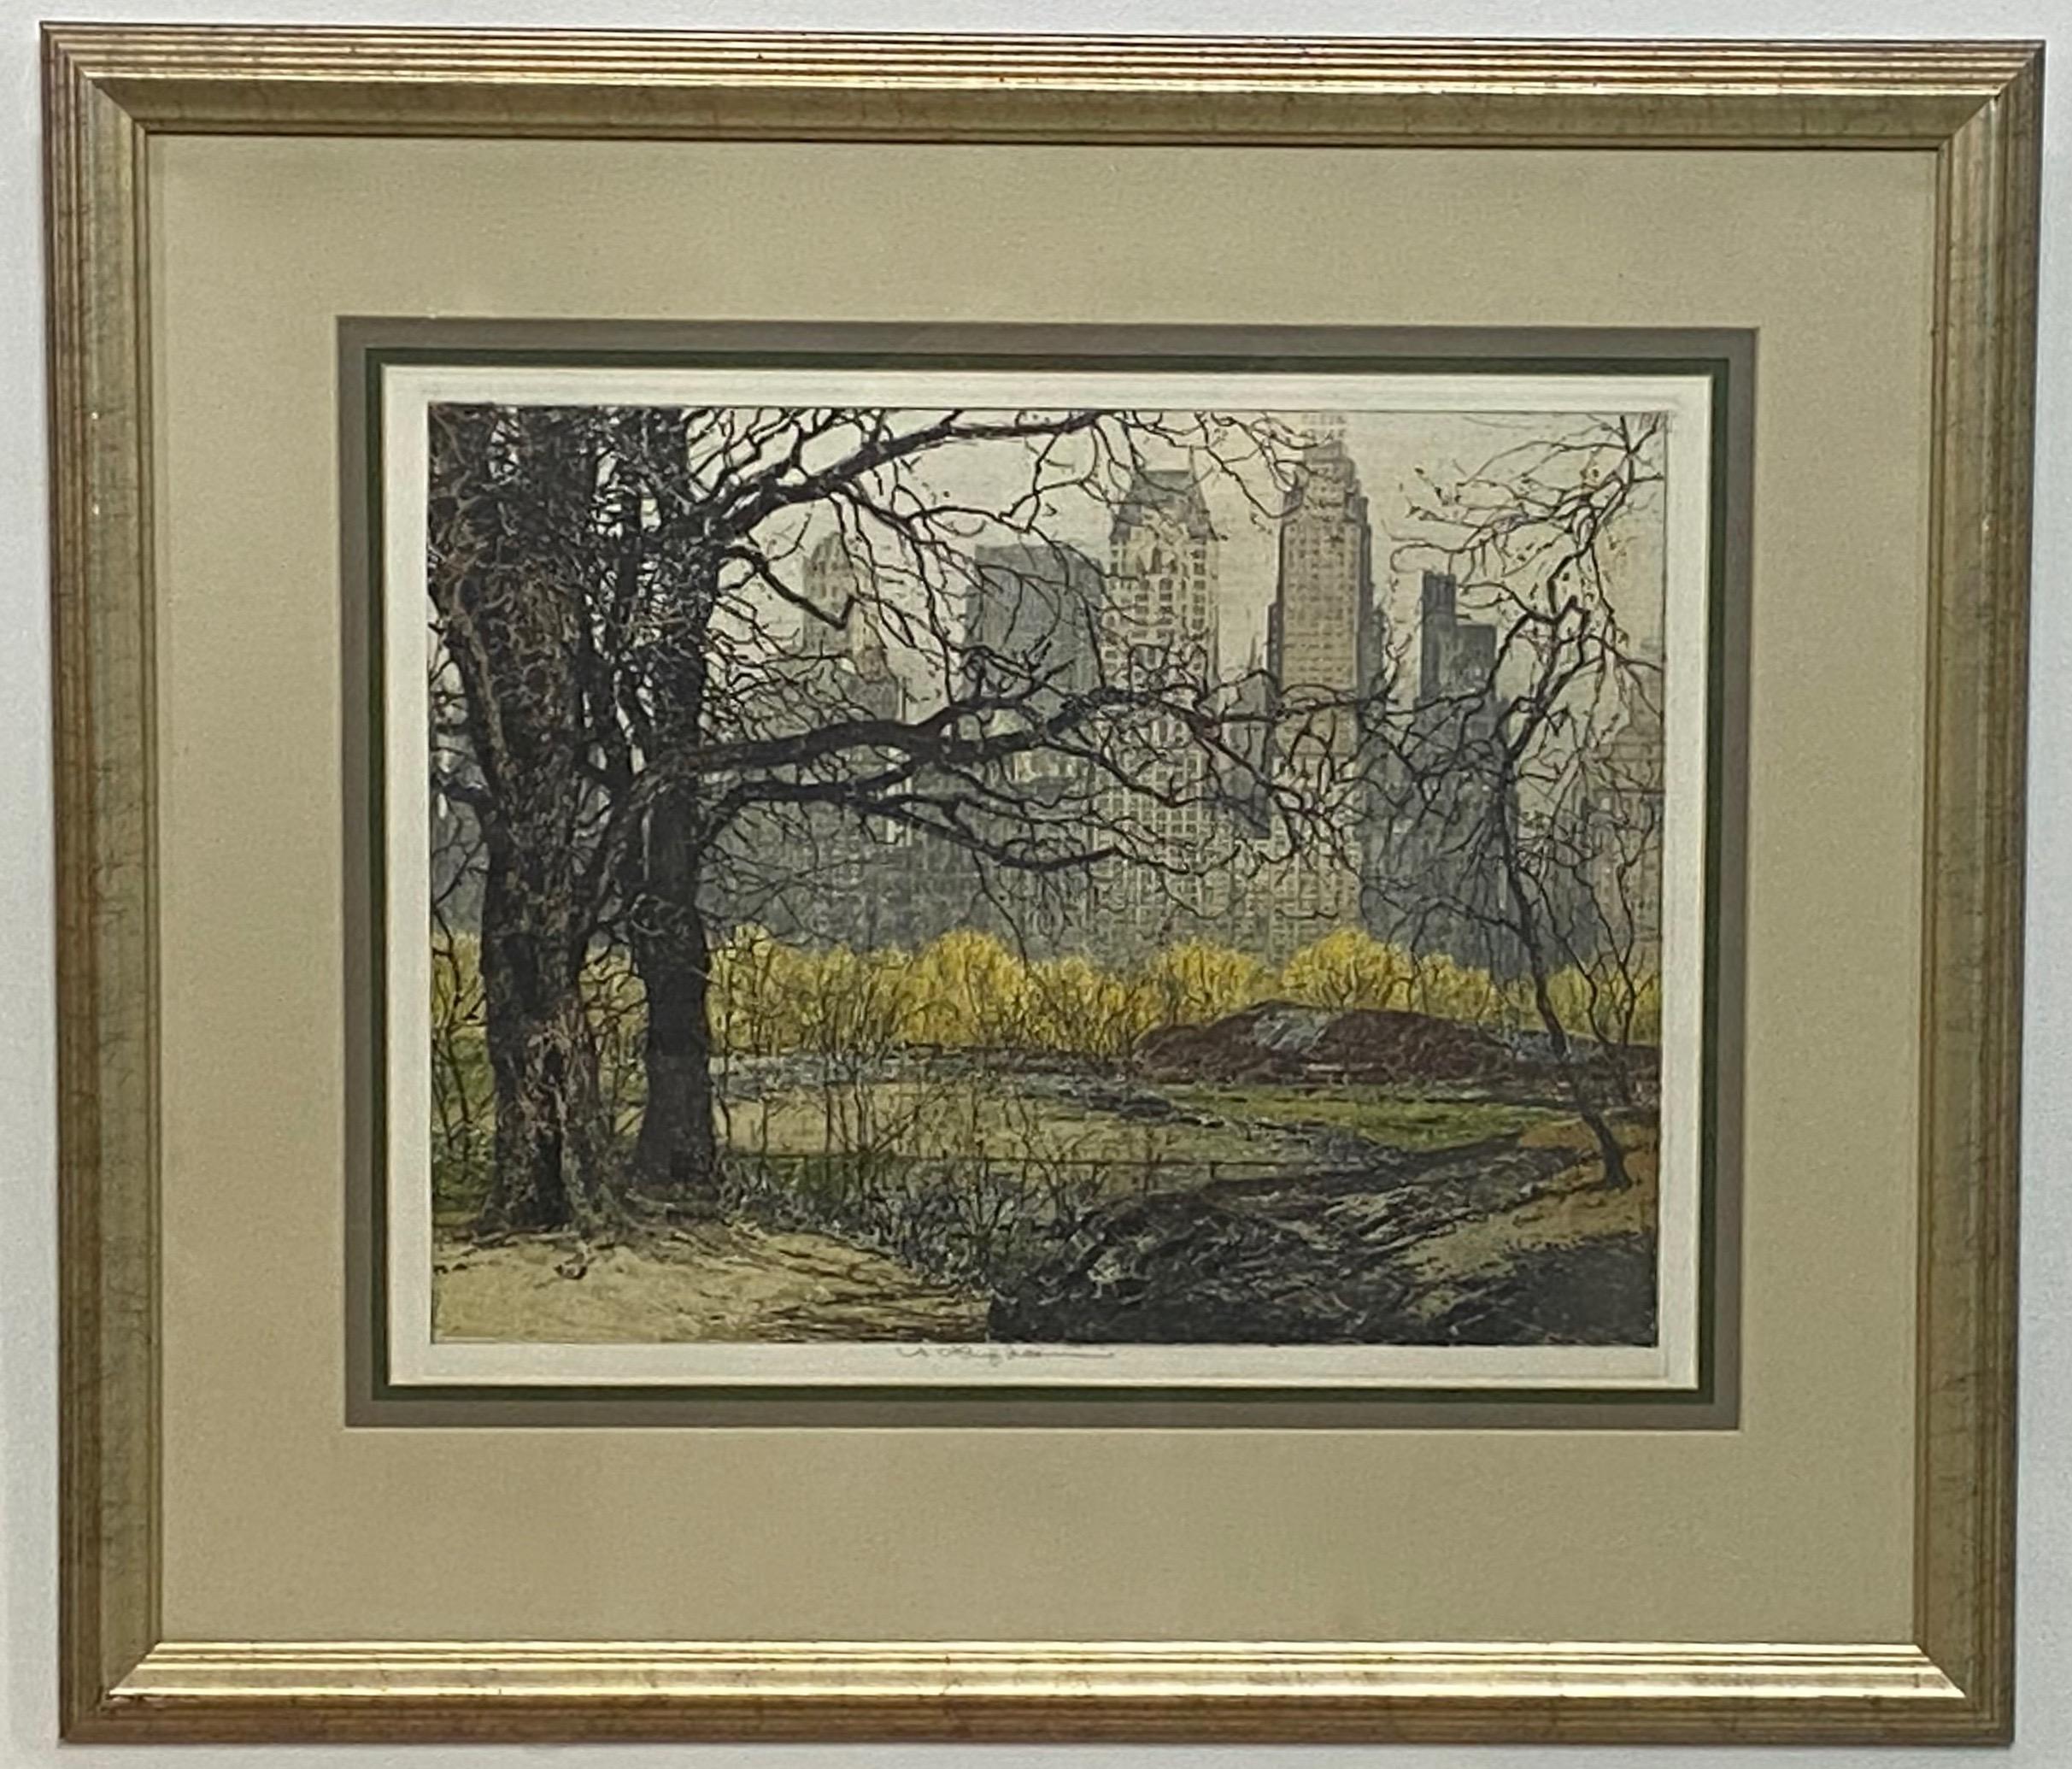 Luigi Kasimir (Austrian 1881-1962).
Hand tinted etching of New York City Manhattan skyline, signed lower right. Framed behind glass, in excellent condition.
First half of 20th century.

